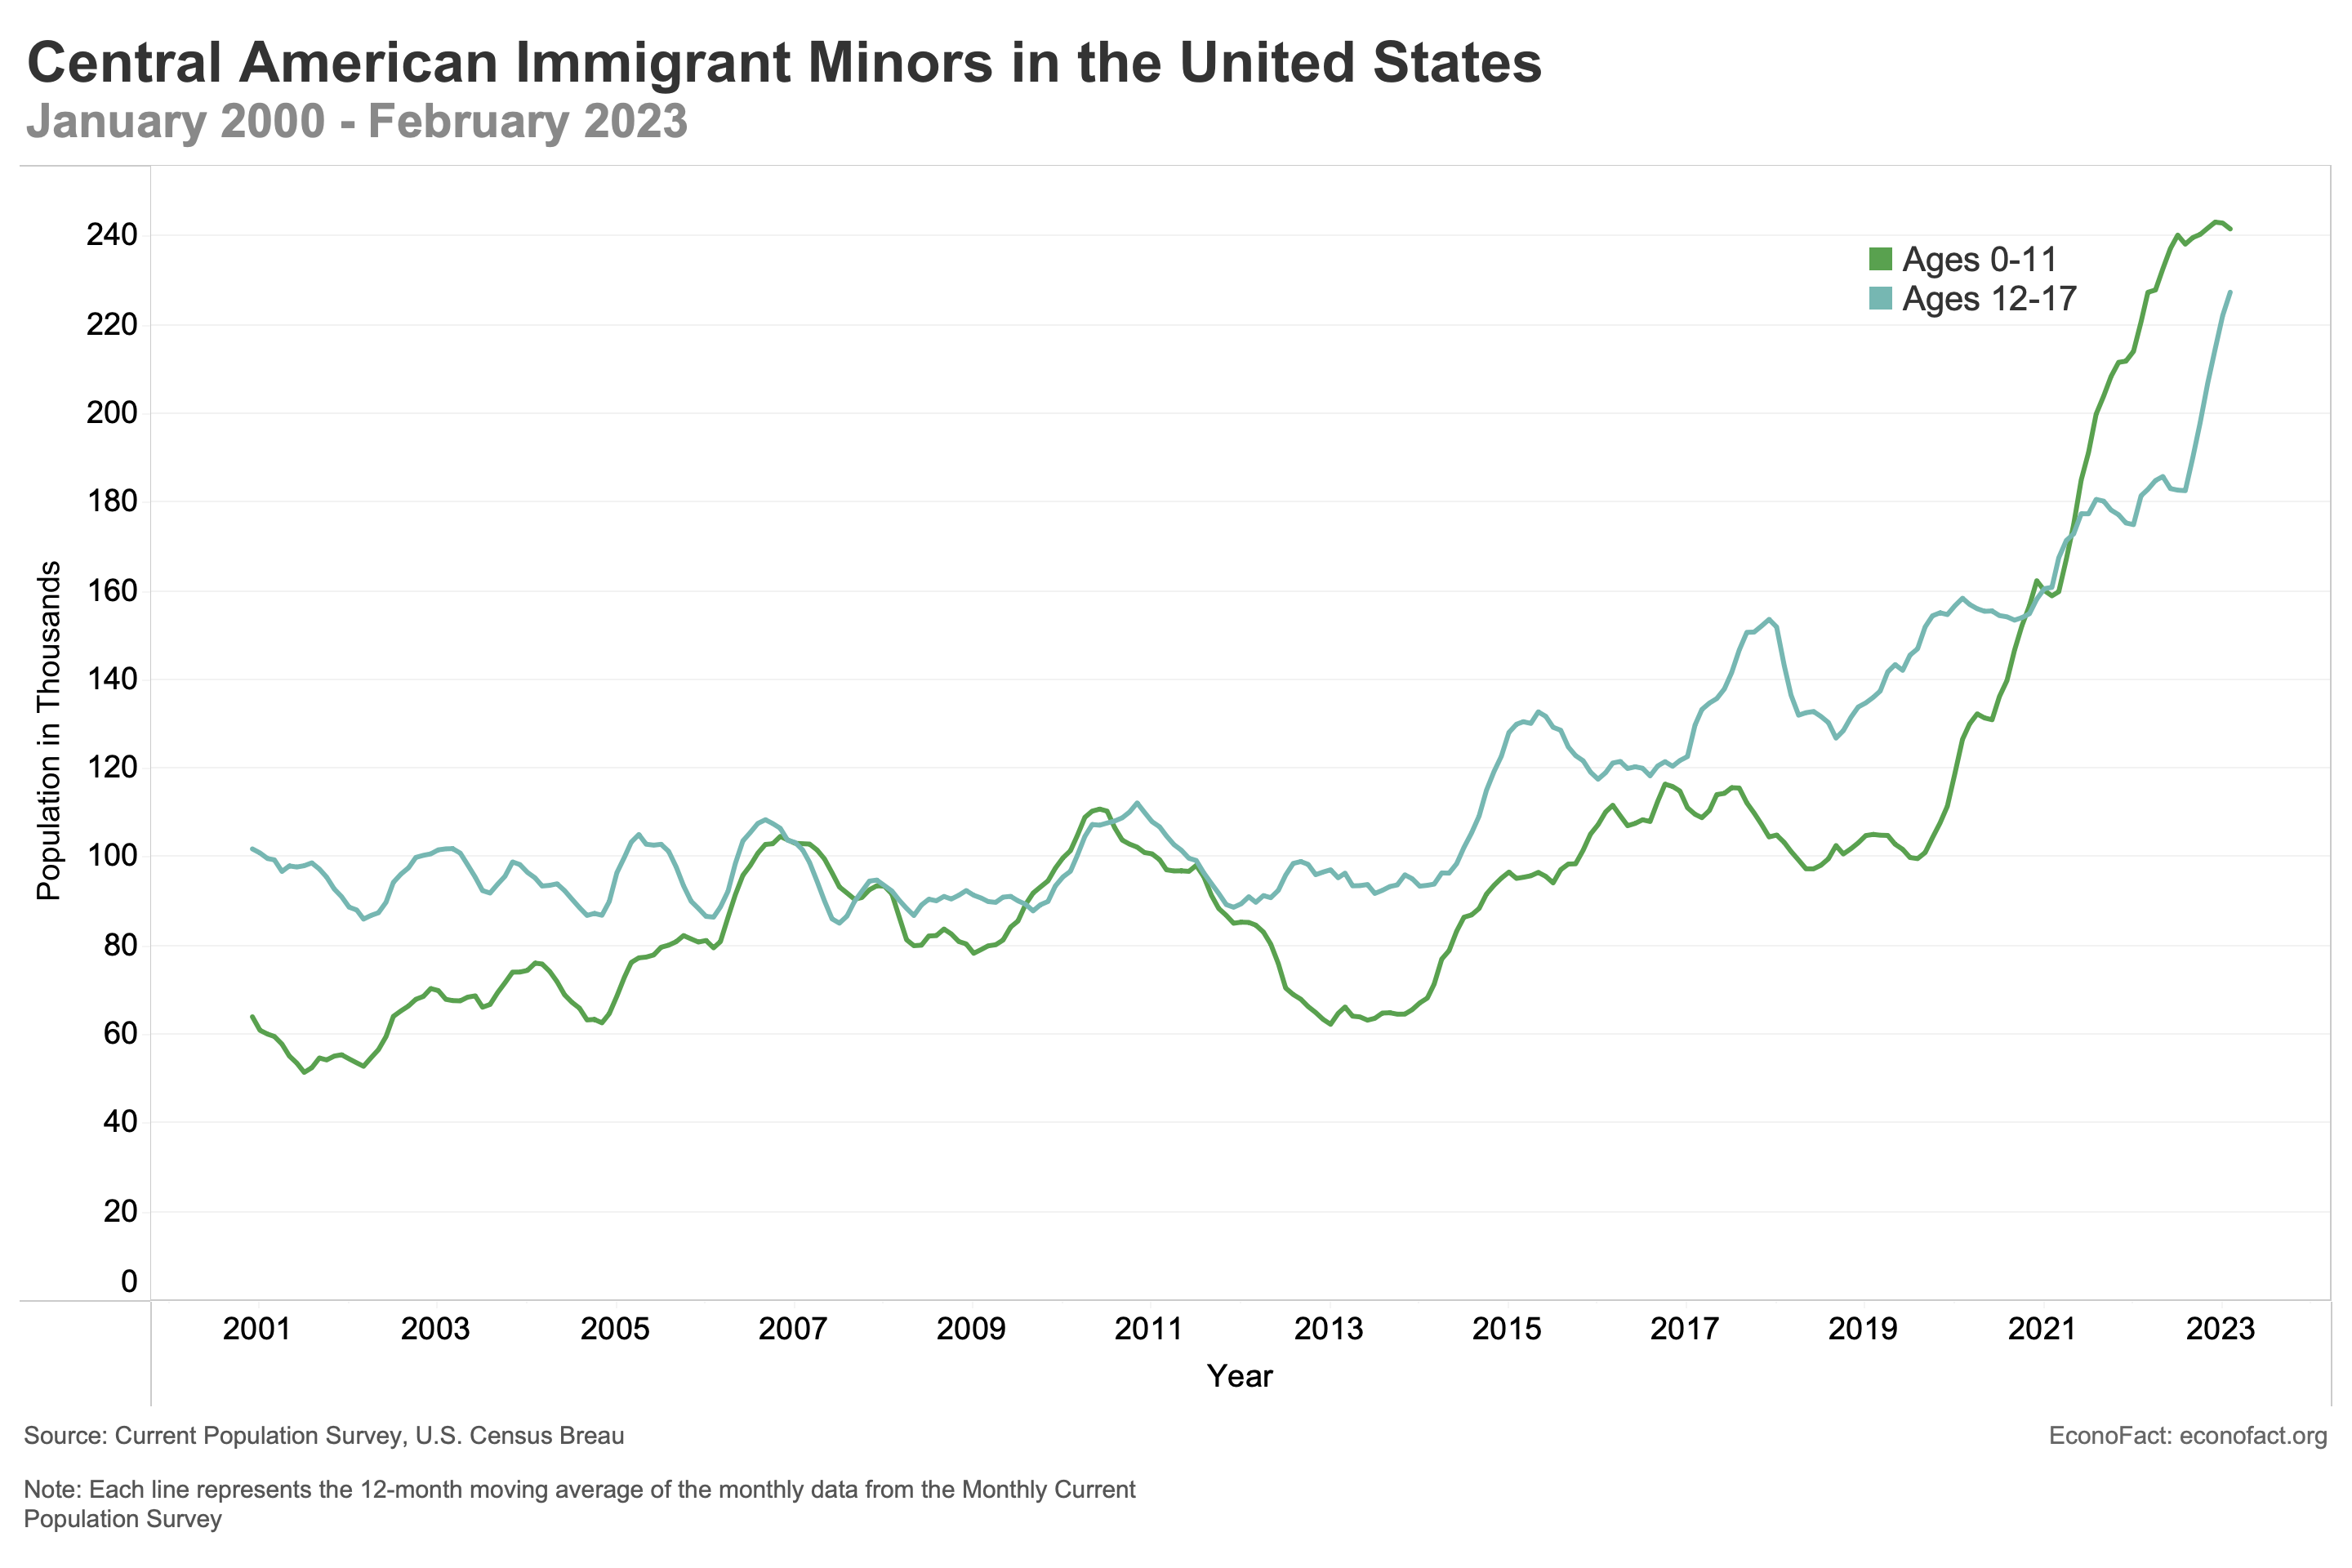 Migration of Central American Minors to the United States